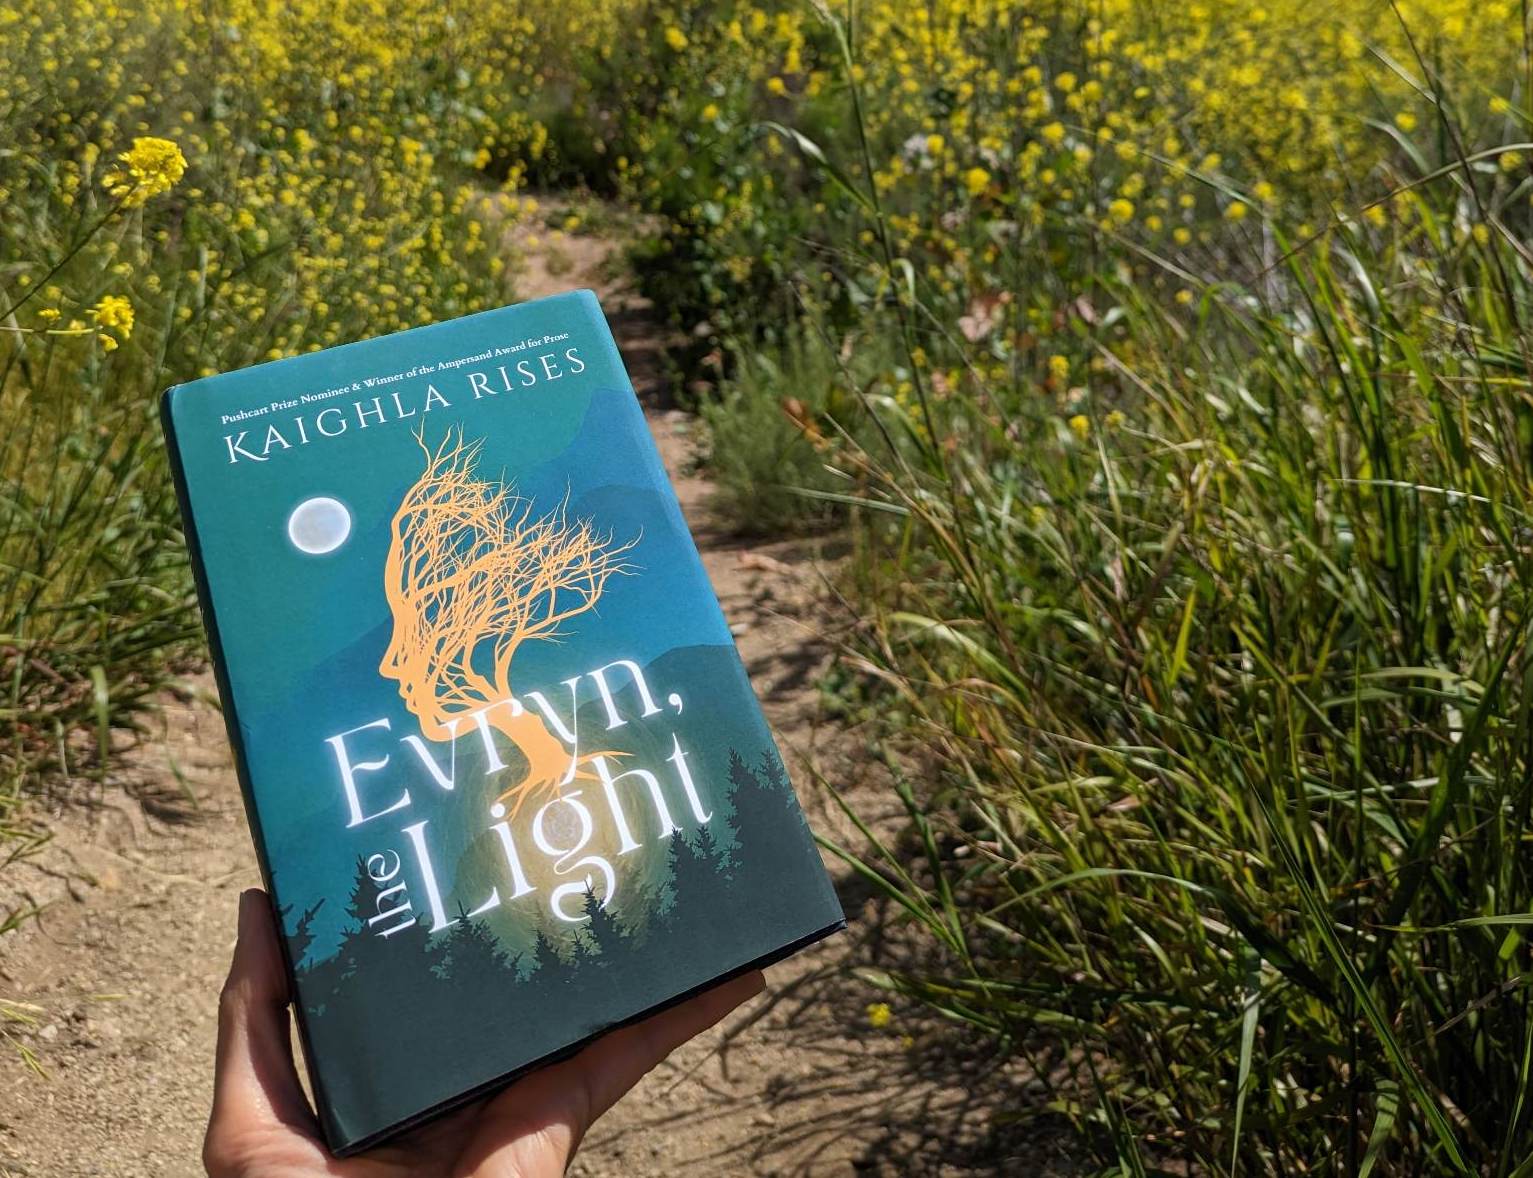 The cover of Evryn, the Light. The cover is turquoise and features an outline of the profile of a figure with tree branches extending as part of the head. The cover is being held with a backdrop of tall grass and greenery